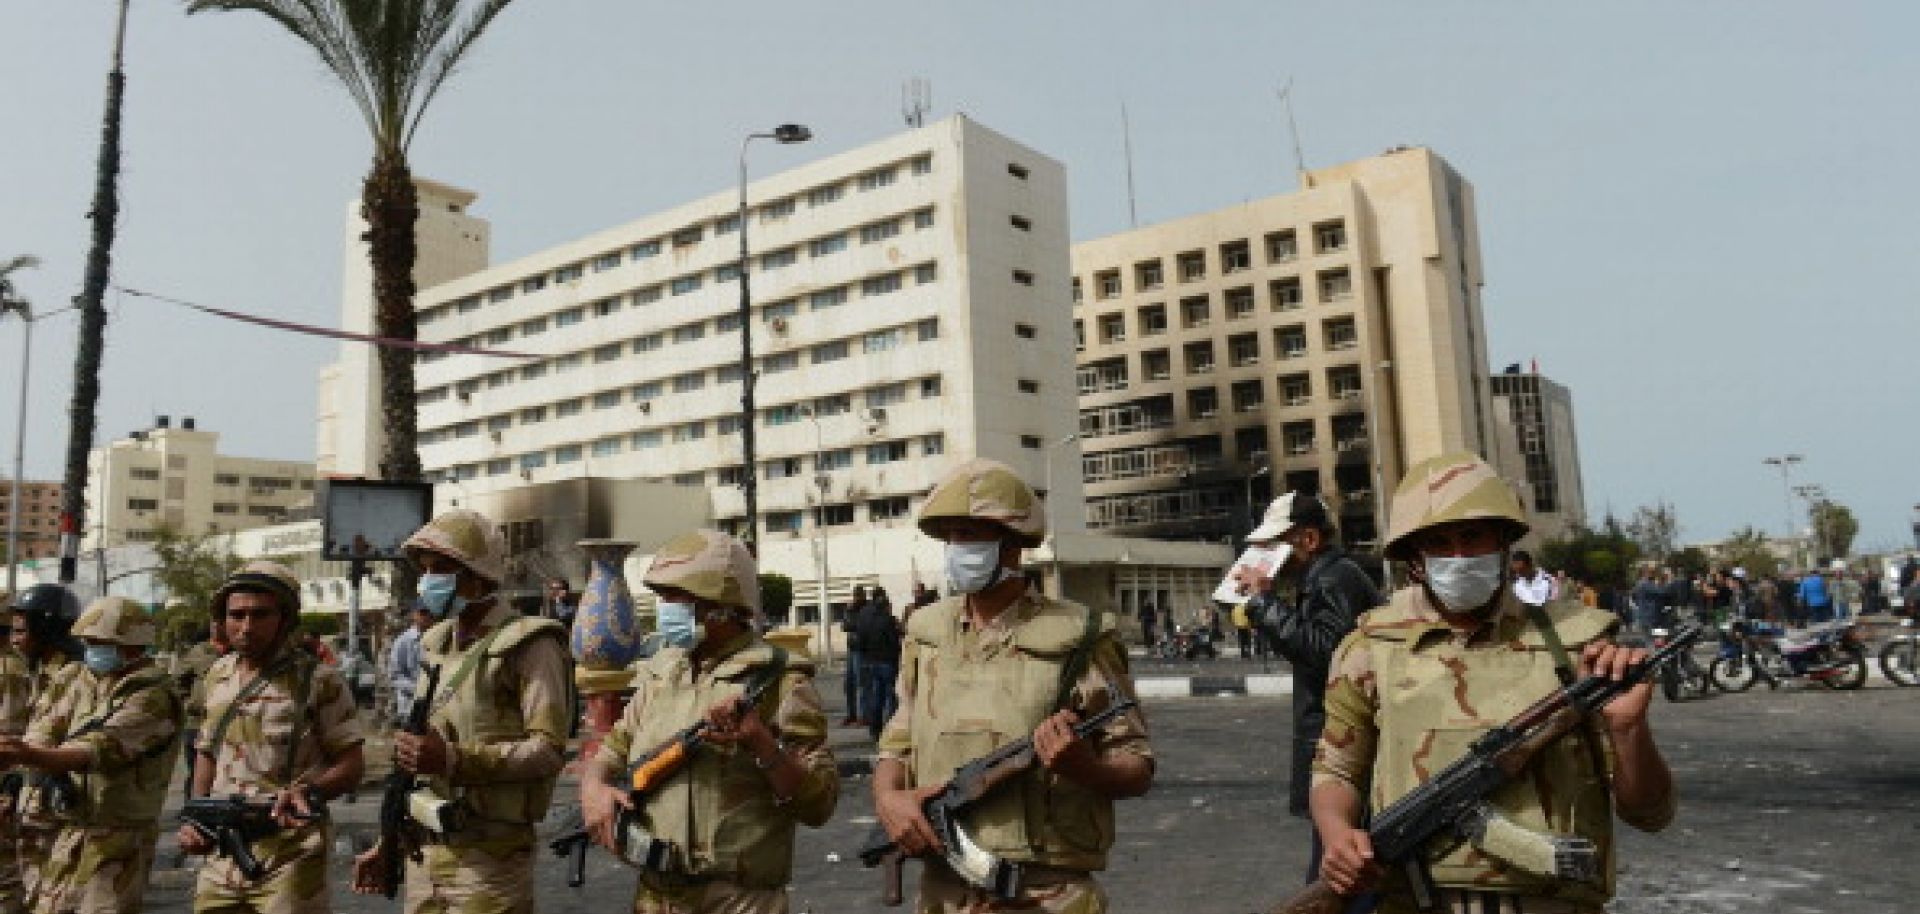 In Egypt, the Military Enforces the Law